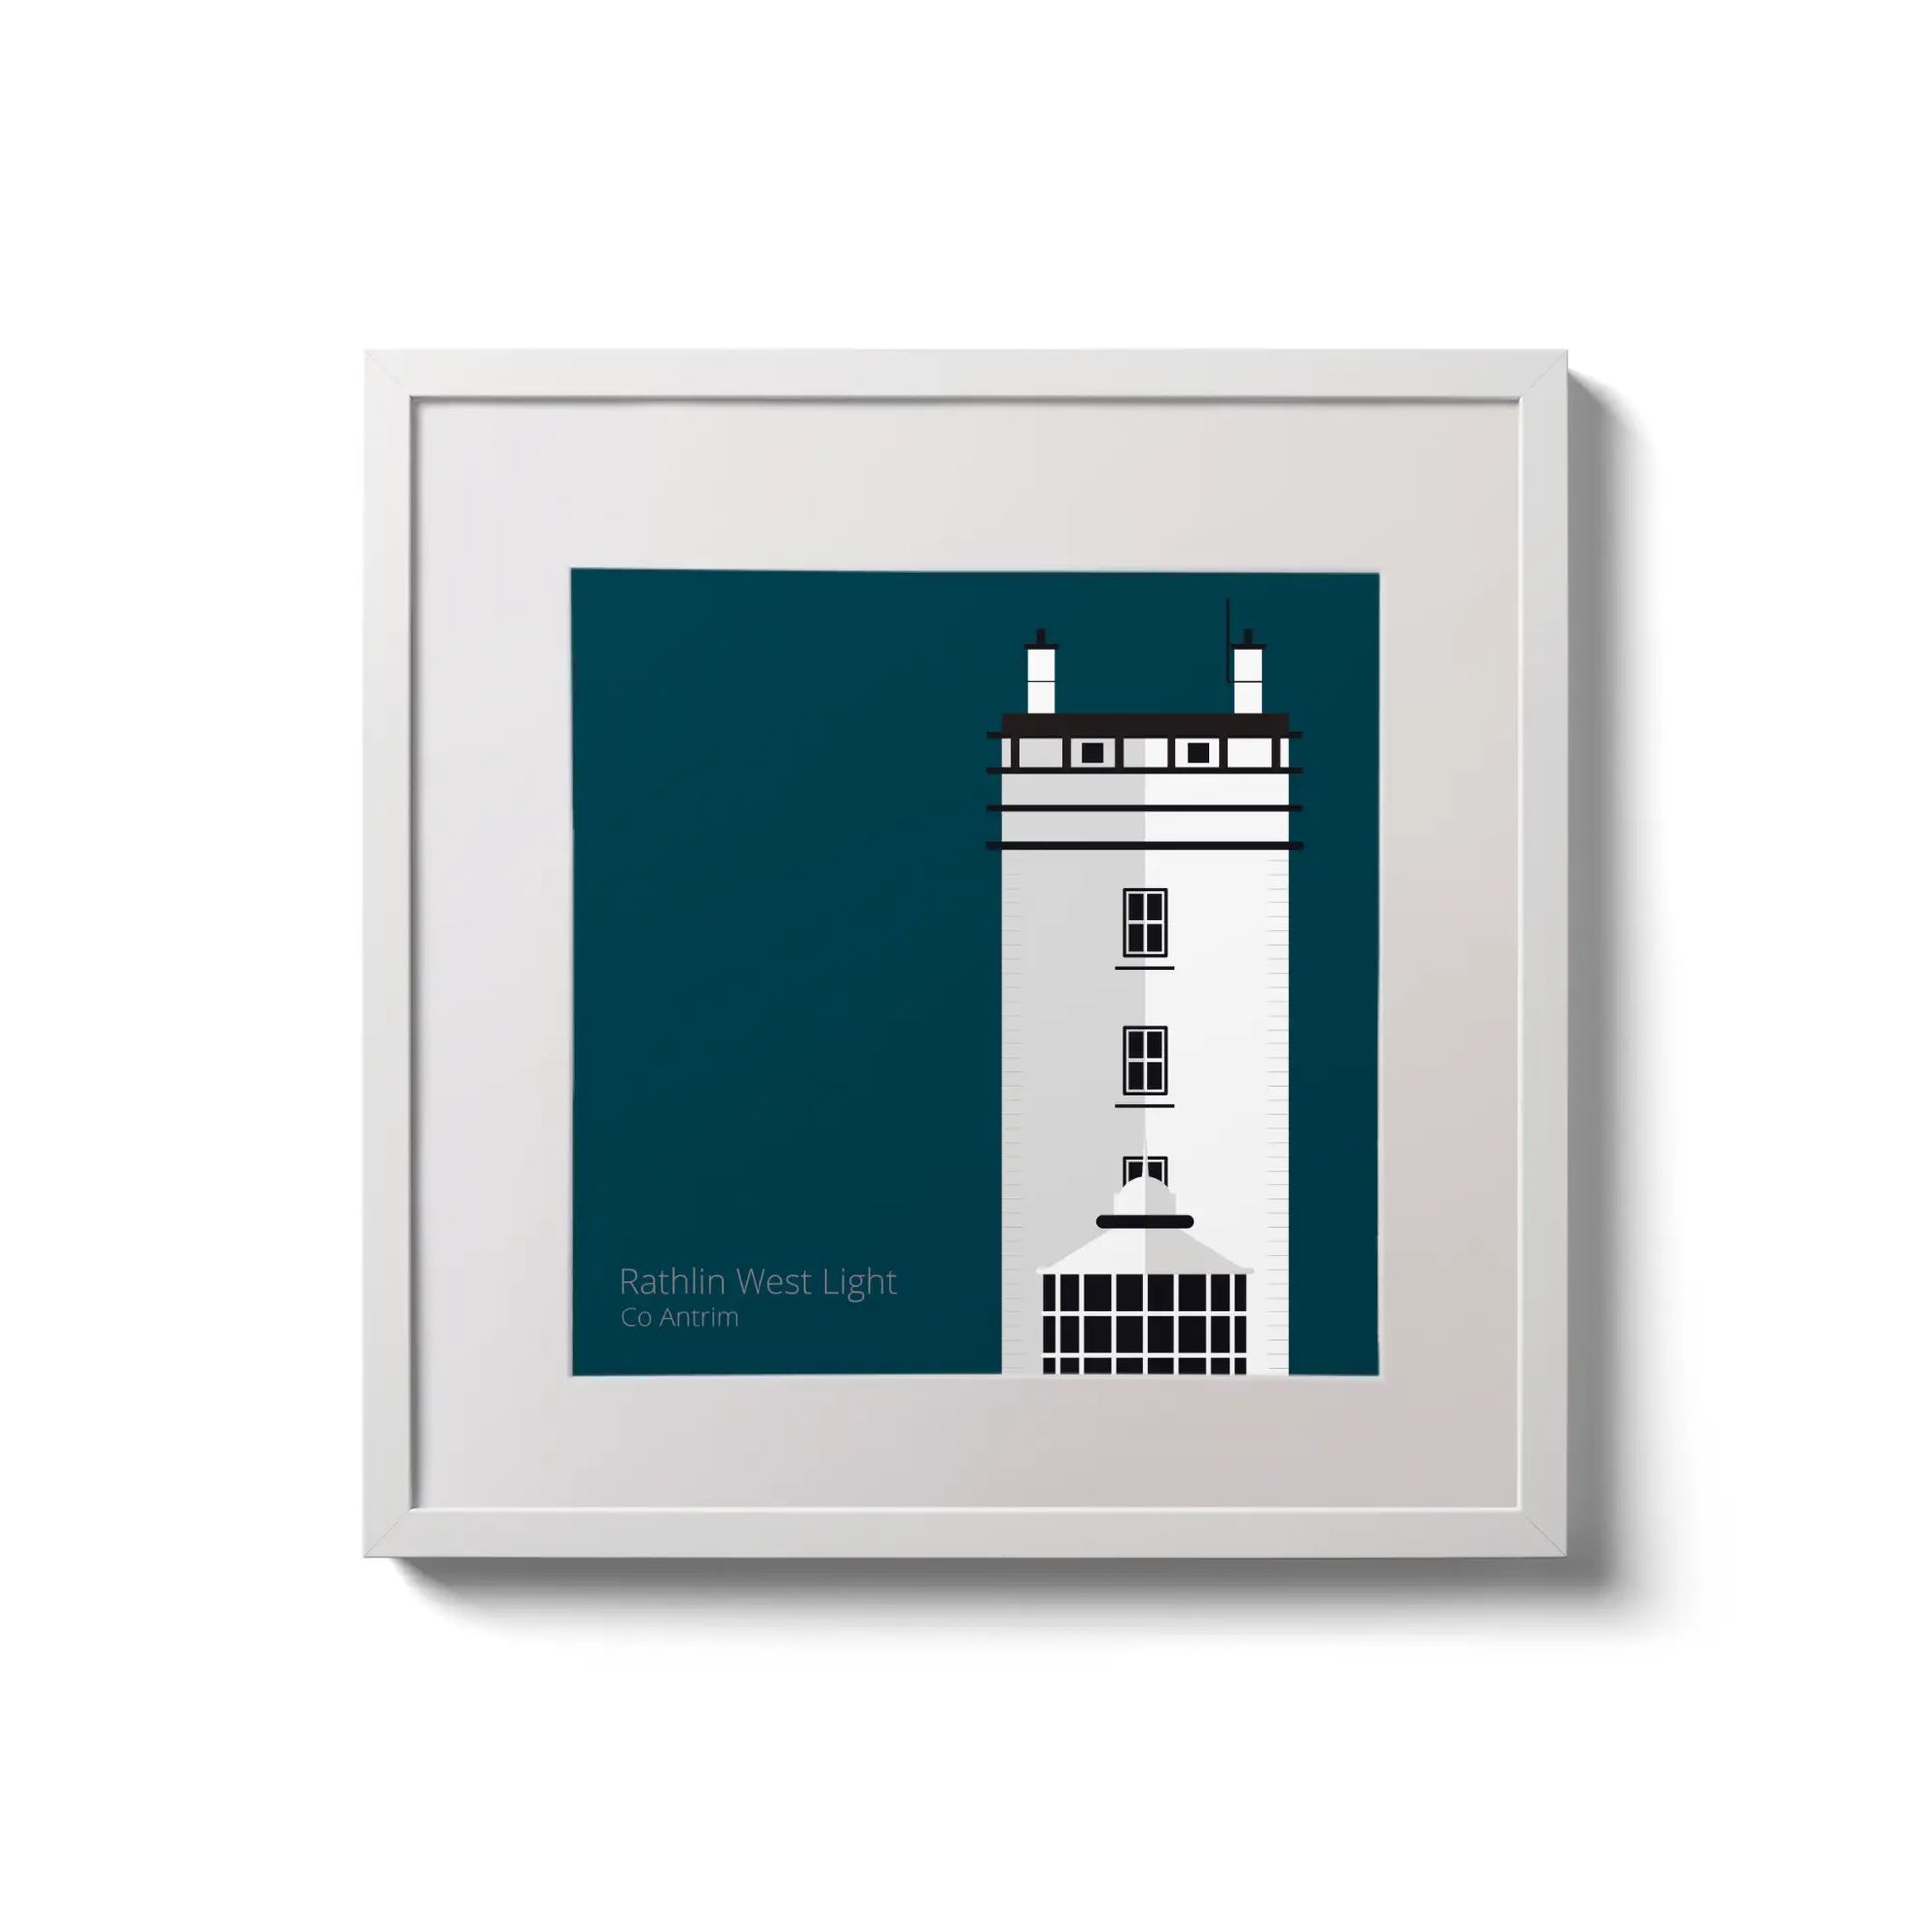 Illustration of Rathlin West lighthouse on a midnight blue background,  in a white square frame measuring 20x20cm.